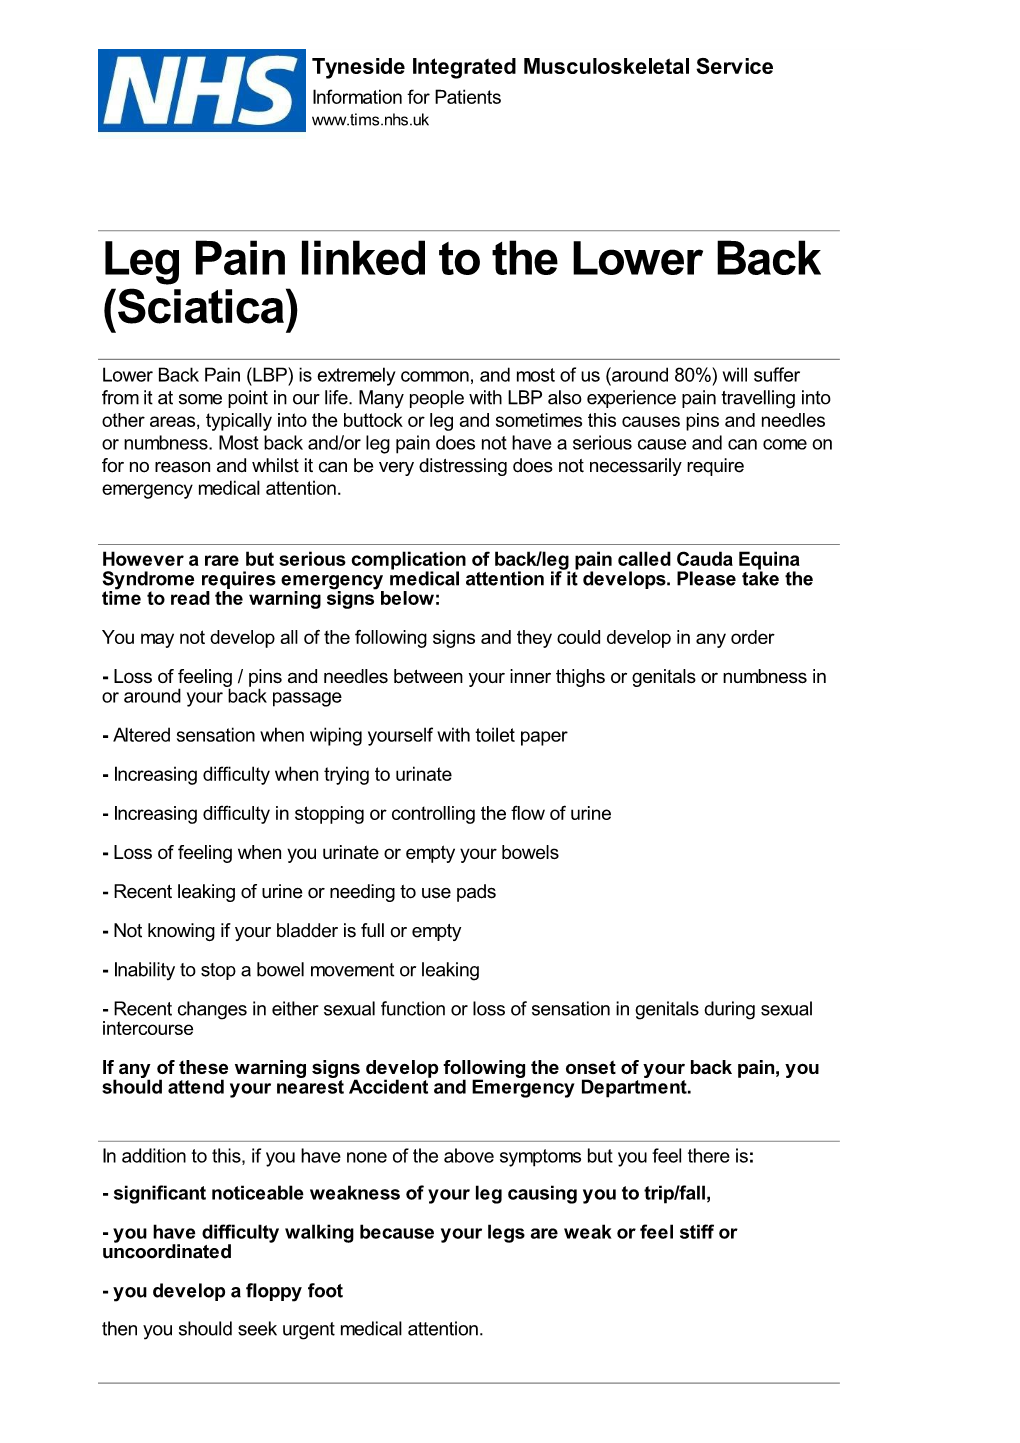 Leg Pain Linked to the Lower Back (Sciatica)